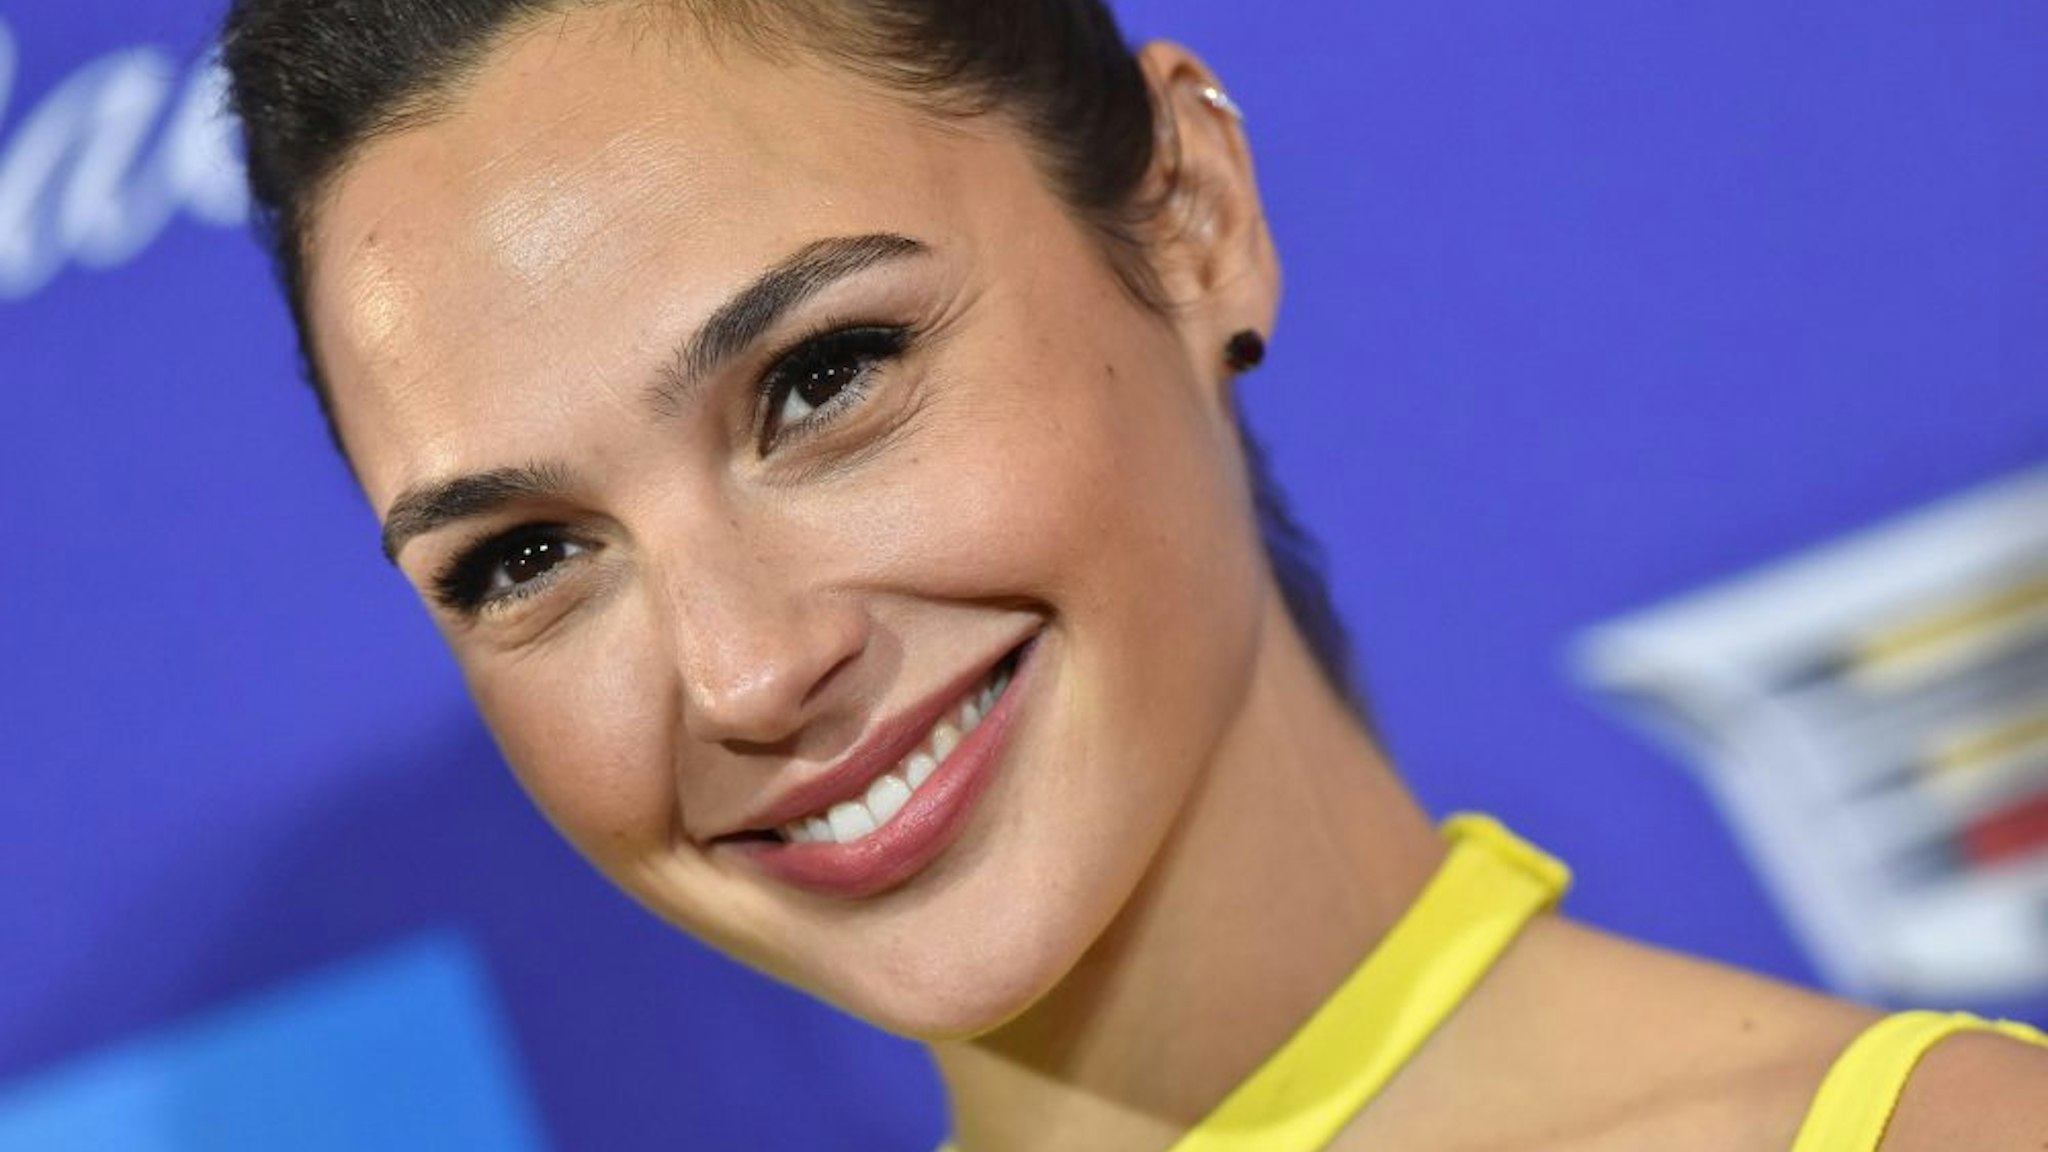 PALM SPRINGS, CA - JANUARY 02: Actress Gal Gadot attends the 29th Annual Palm Springs International Film Festival Awards Gala at Palm Springs Convention Center on January 2, 2018 in Palm Springs, California.